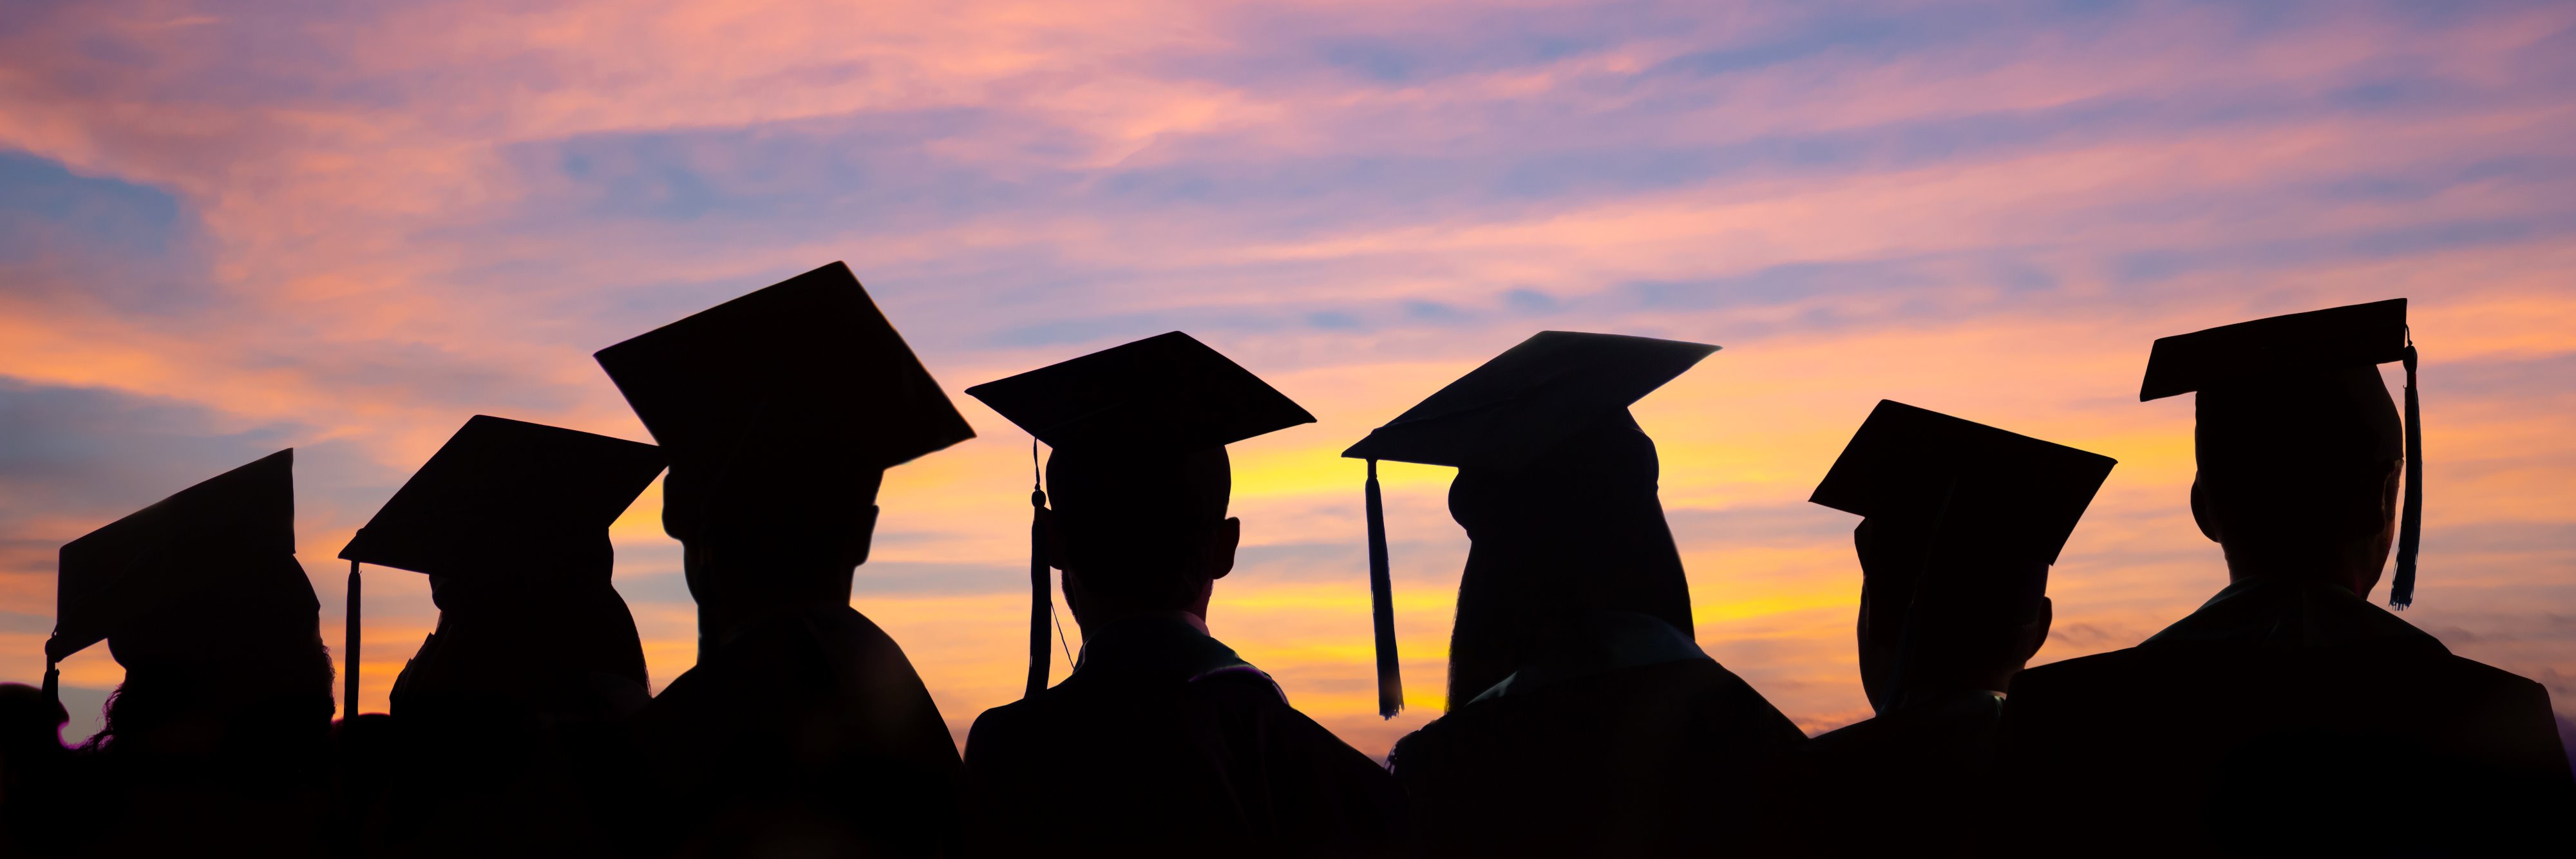 stock-photo-silhouettes-of-students-with-graduate-caps-in-a-row-on-sunset-background-graduation-ceremony-at-1648595998.jpg